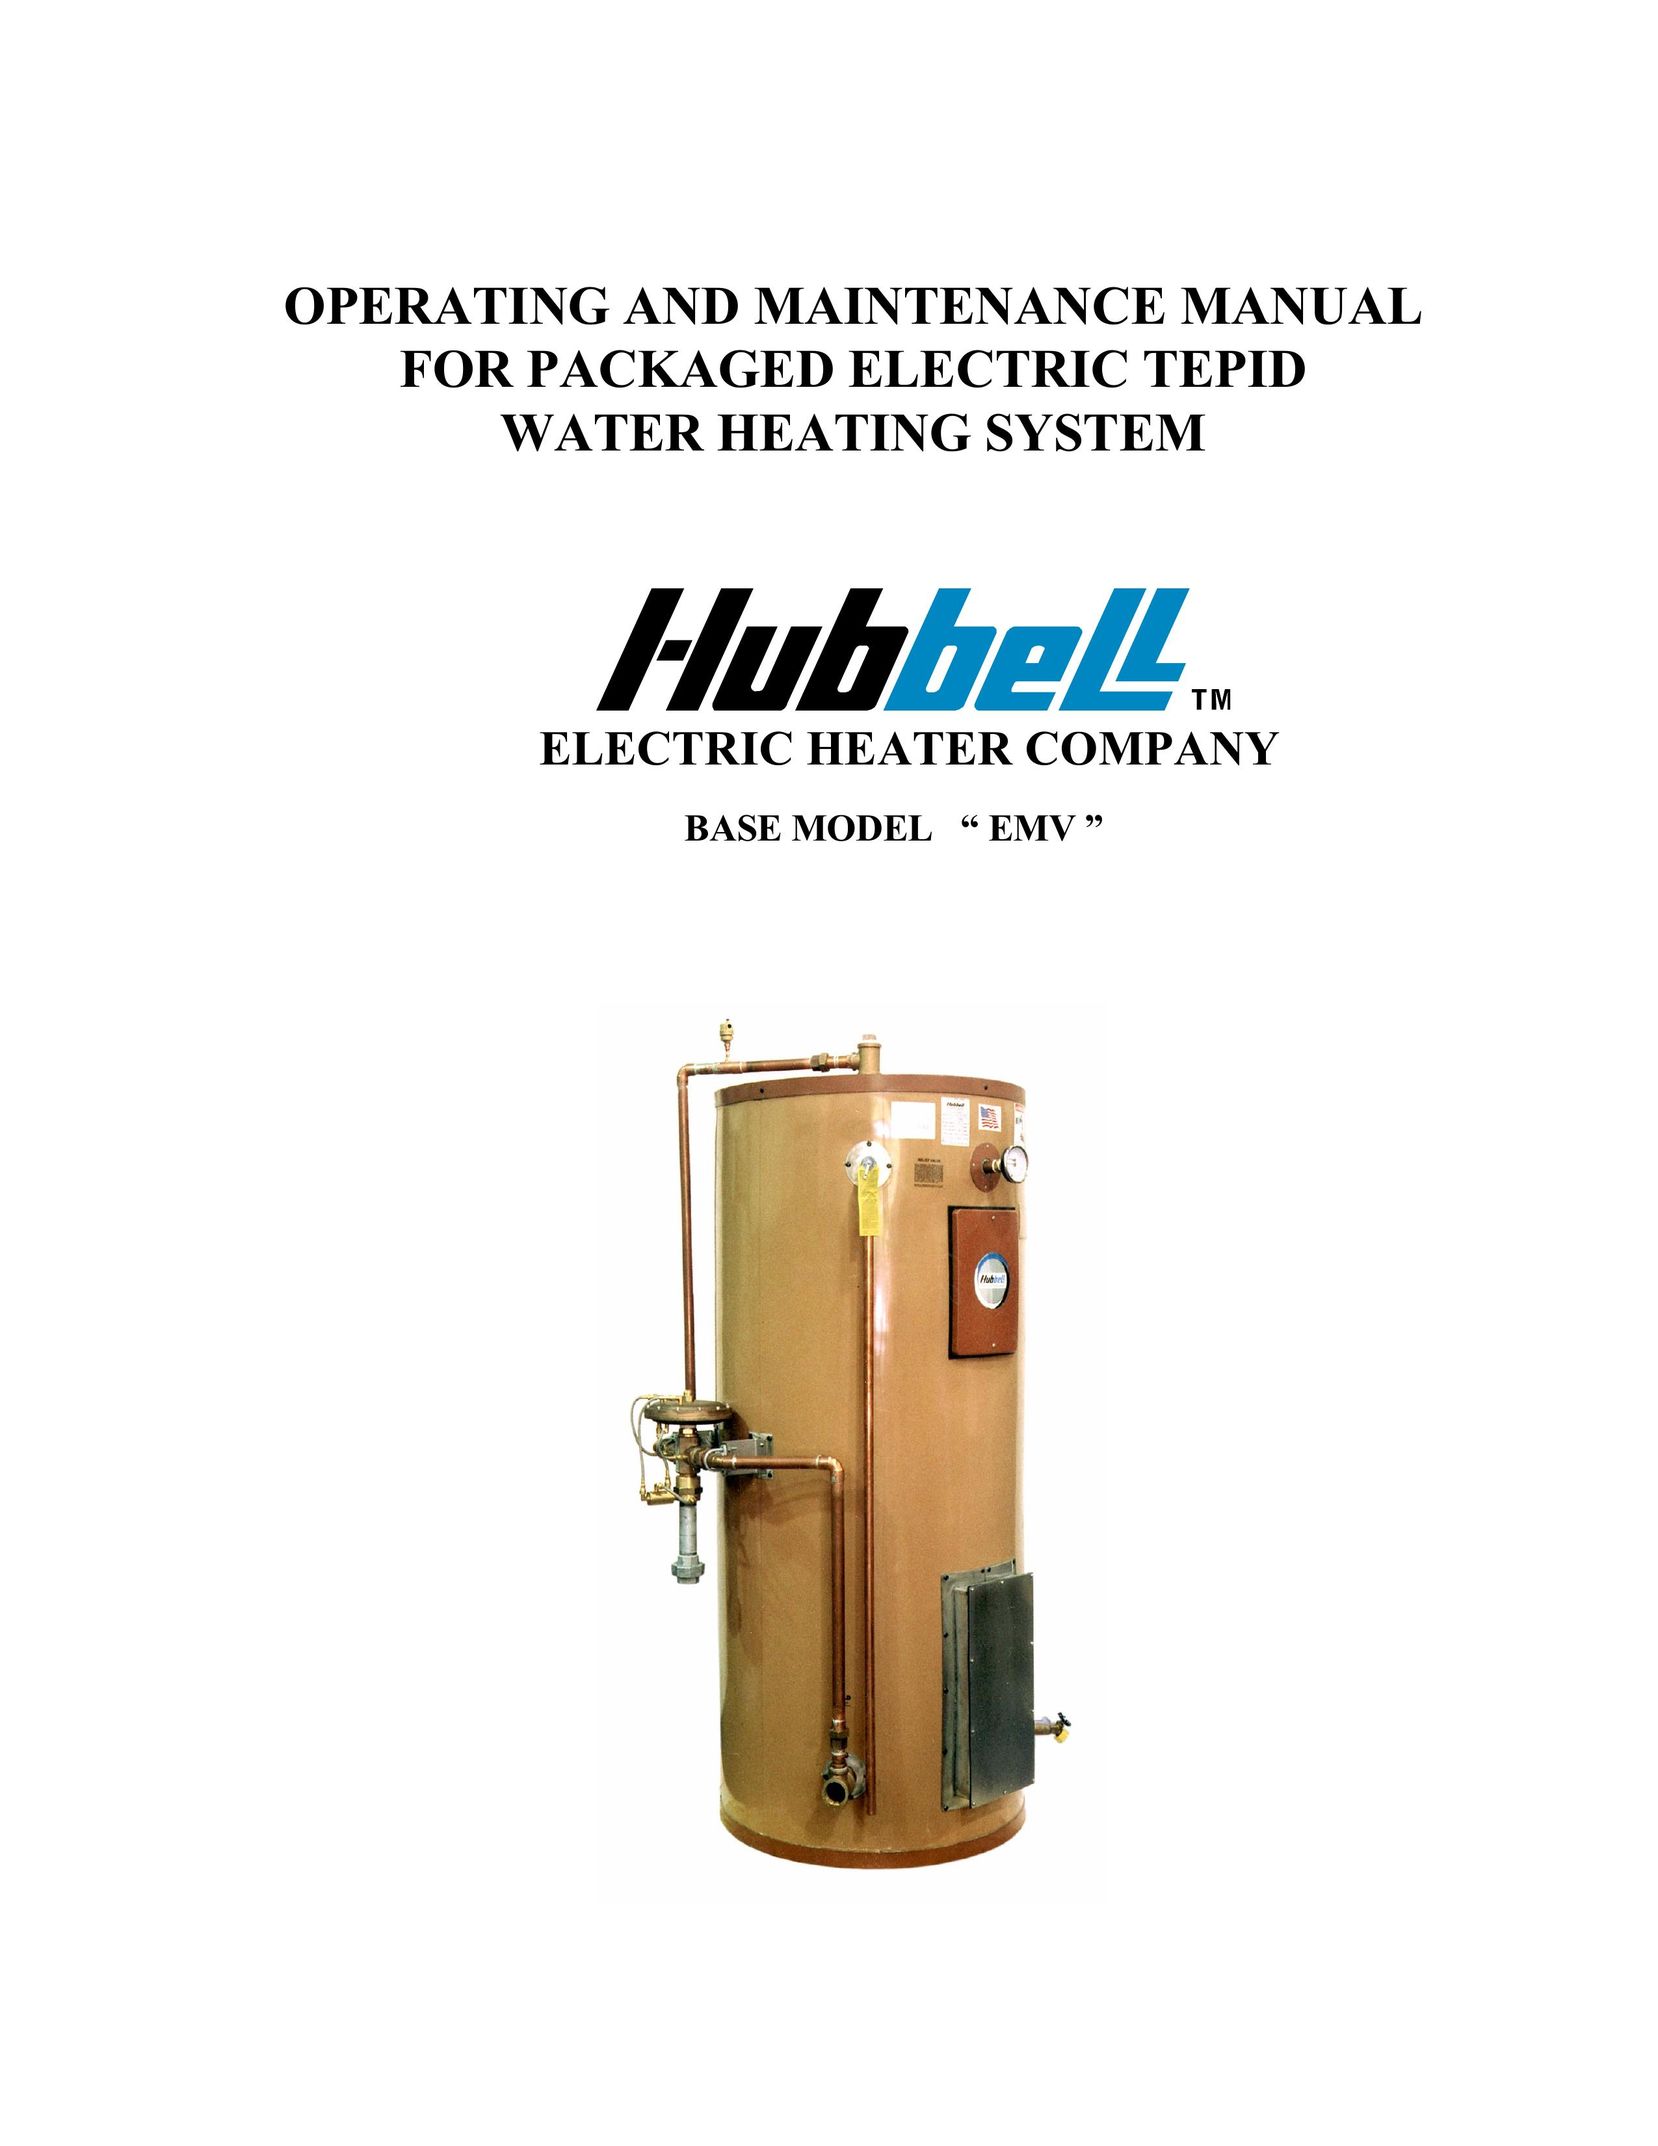 Hubbell Electric Heater Company EMV Water Heater User Manual